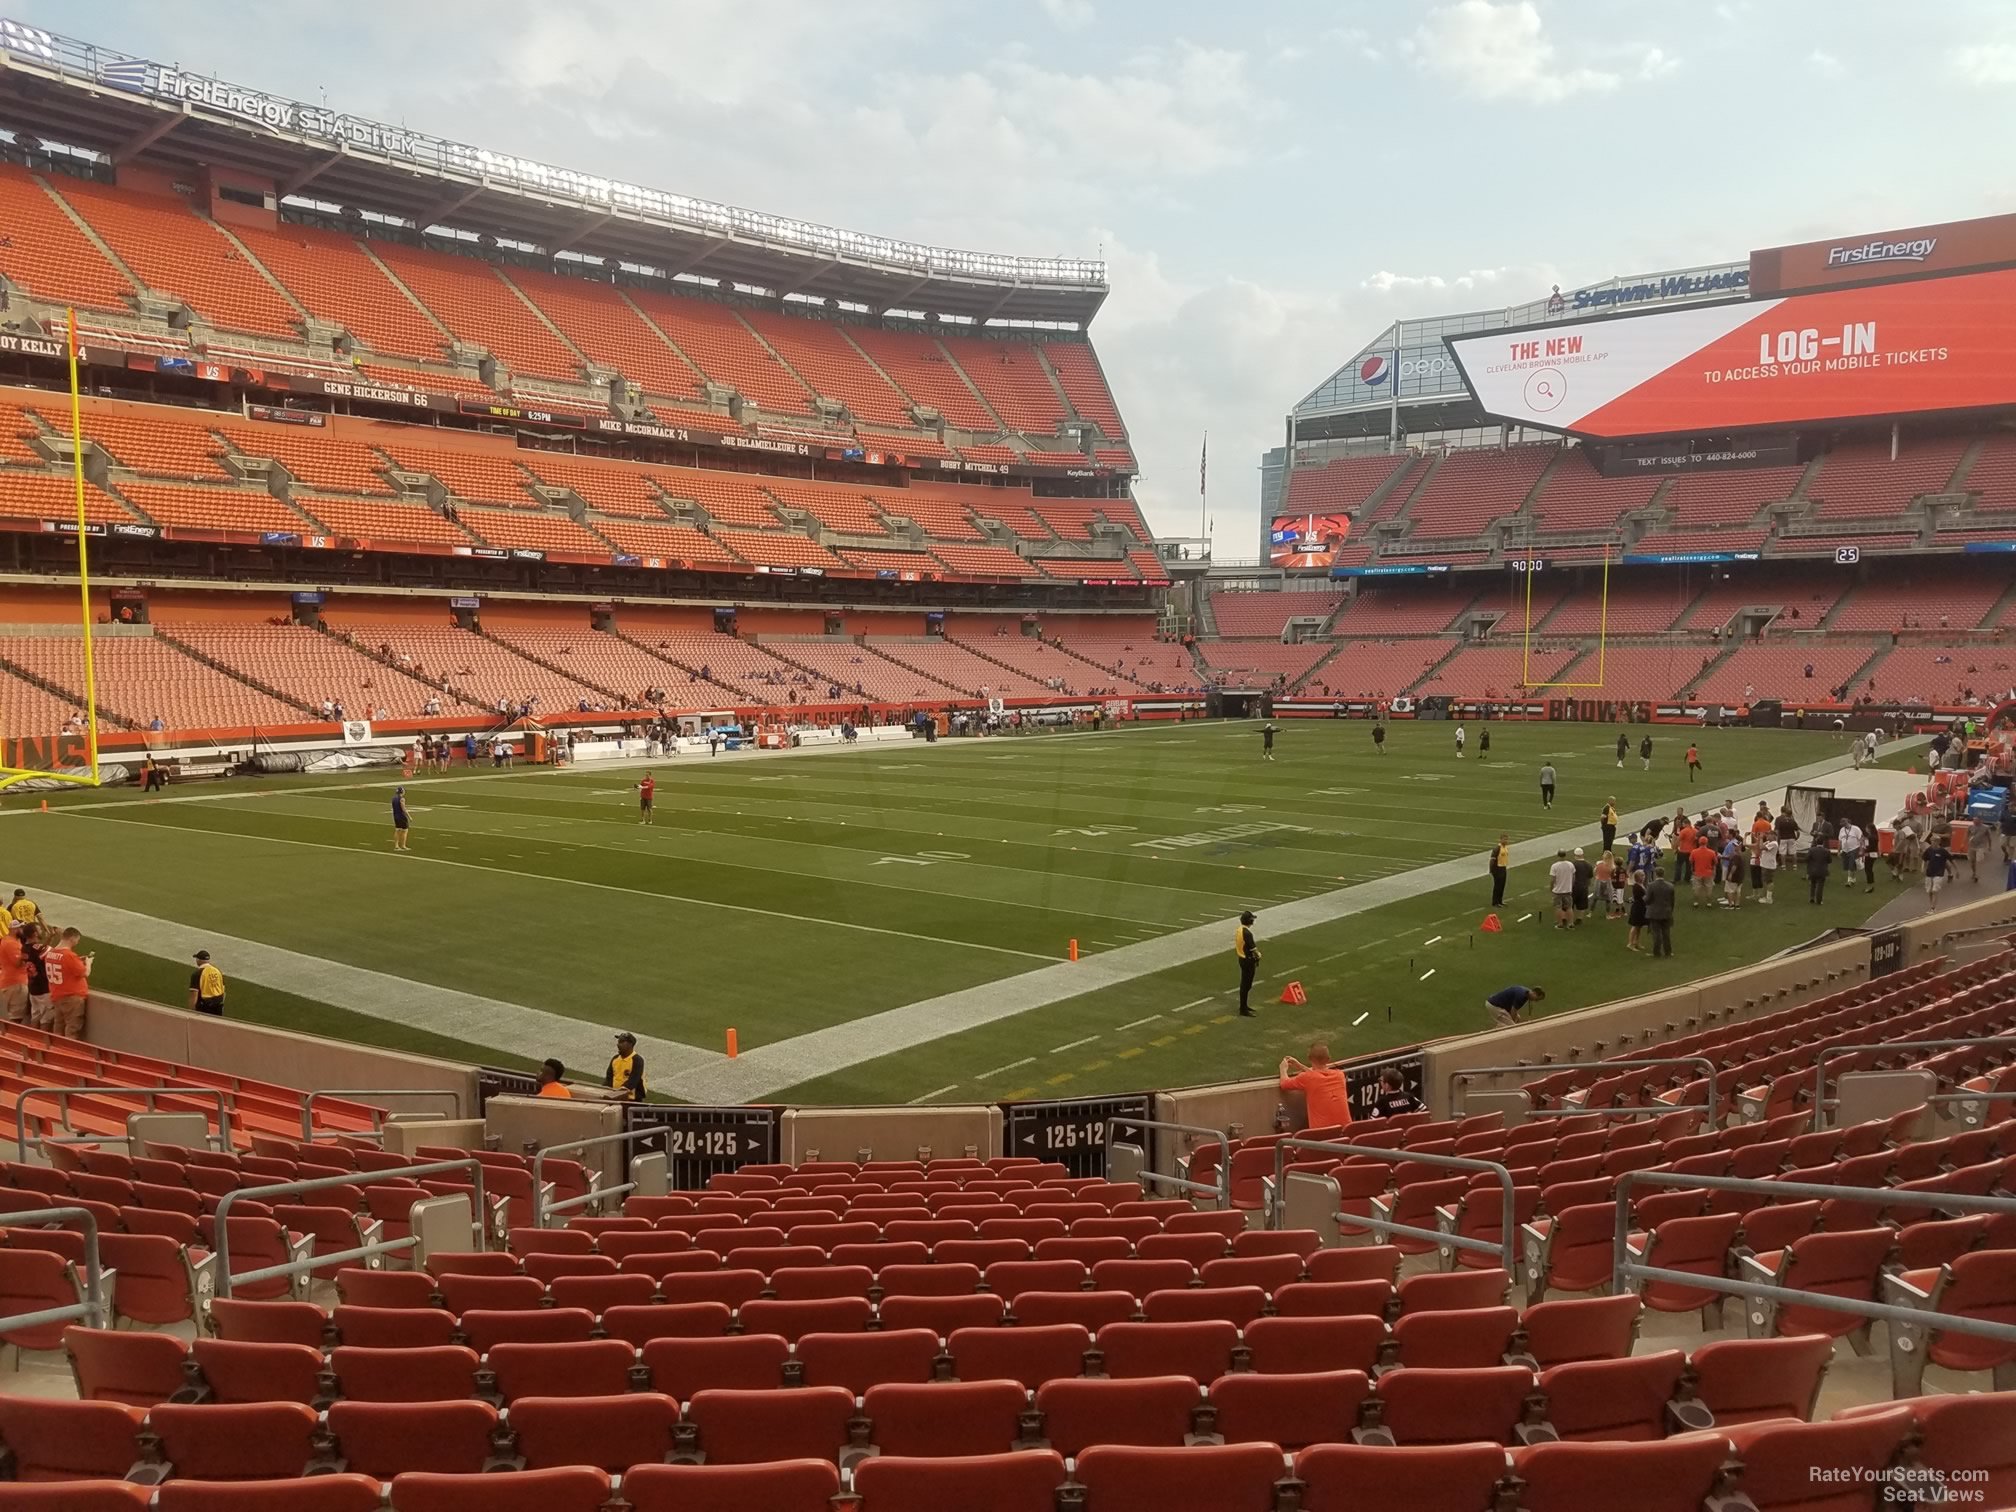 section 125, row 17 seat view  - cleveland browns stadium